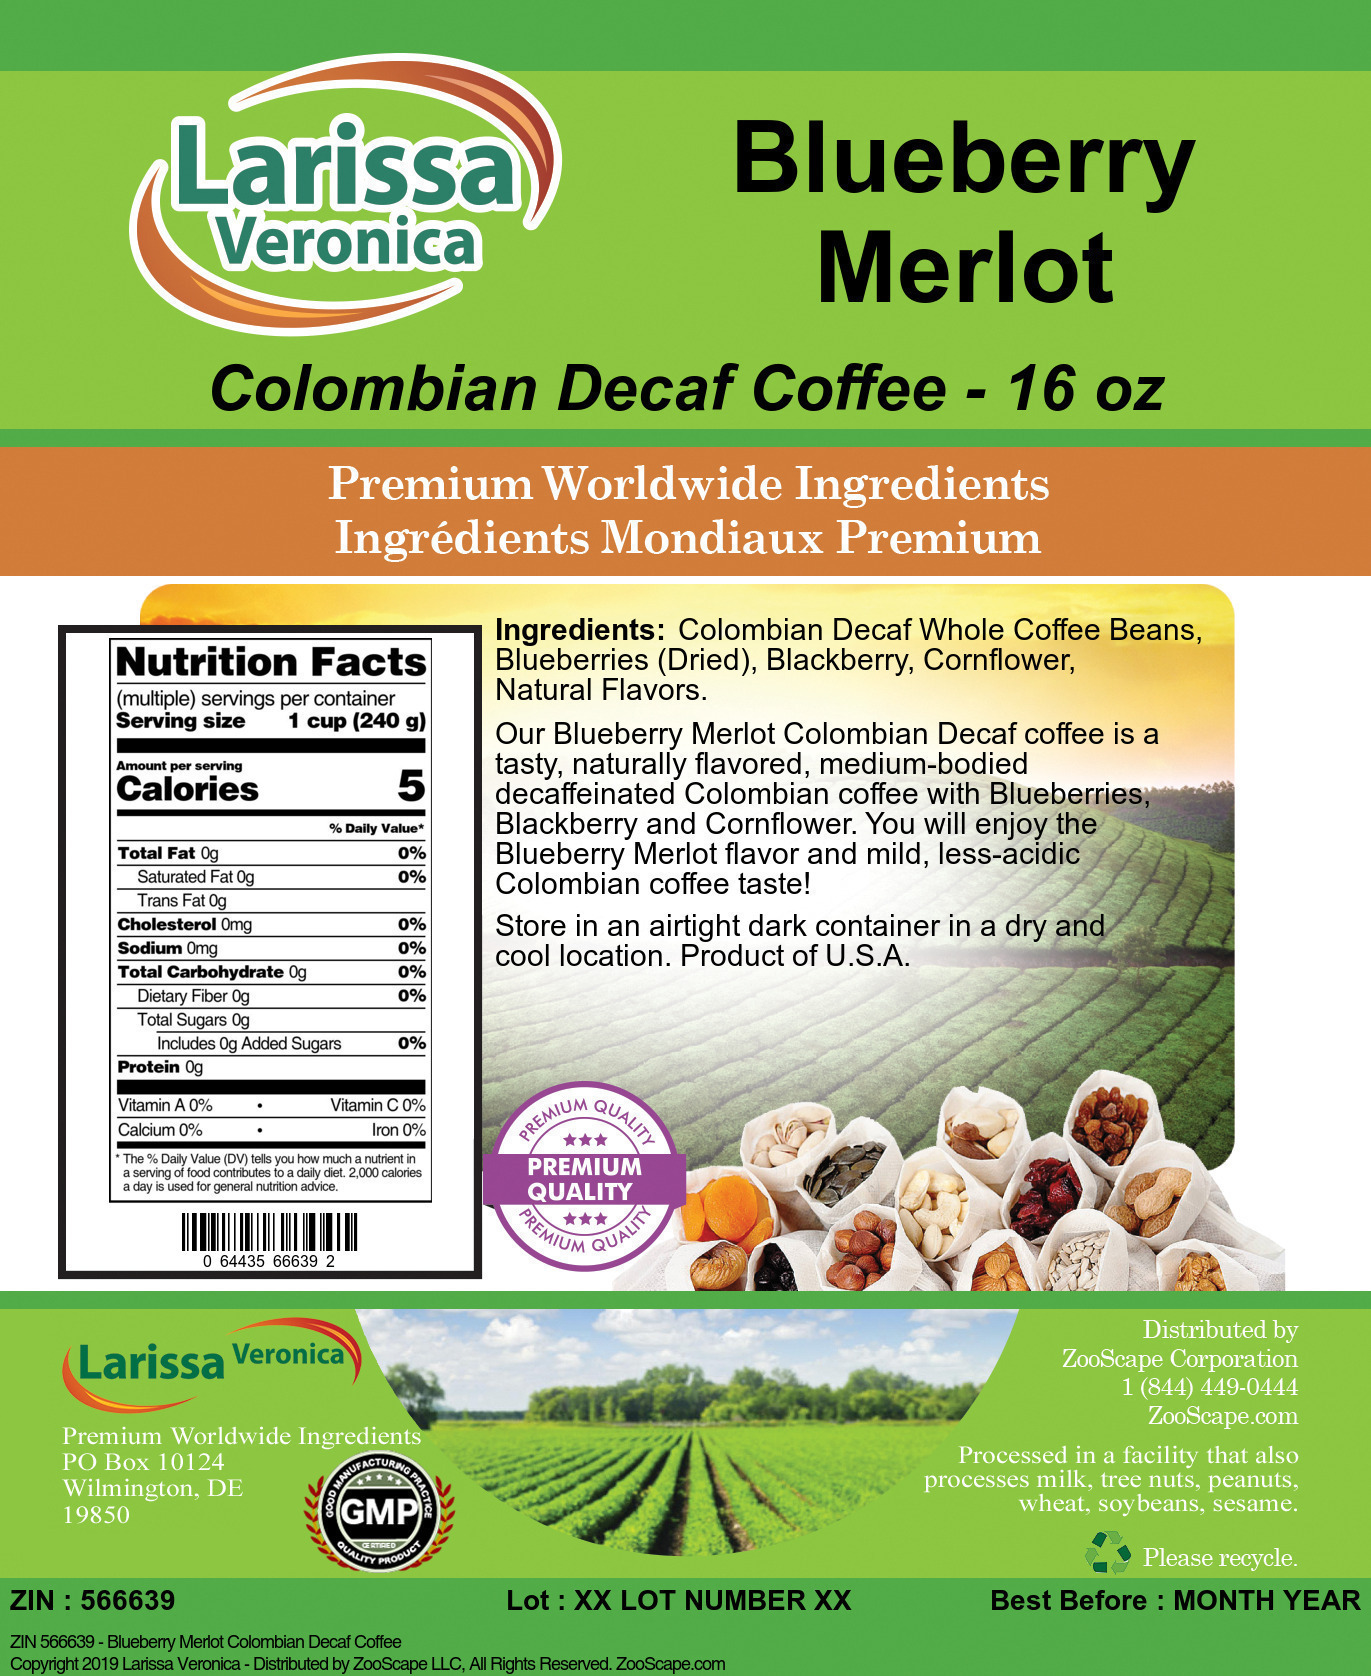 Blueberry Merlot Colombian Decaf Coffee - Label